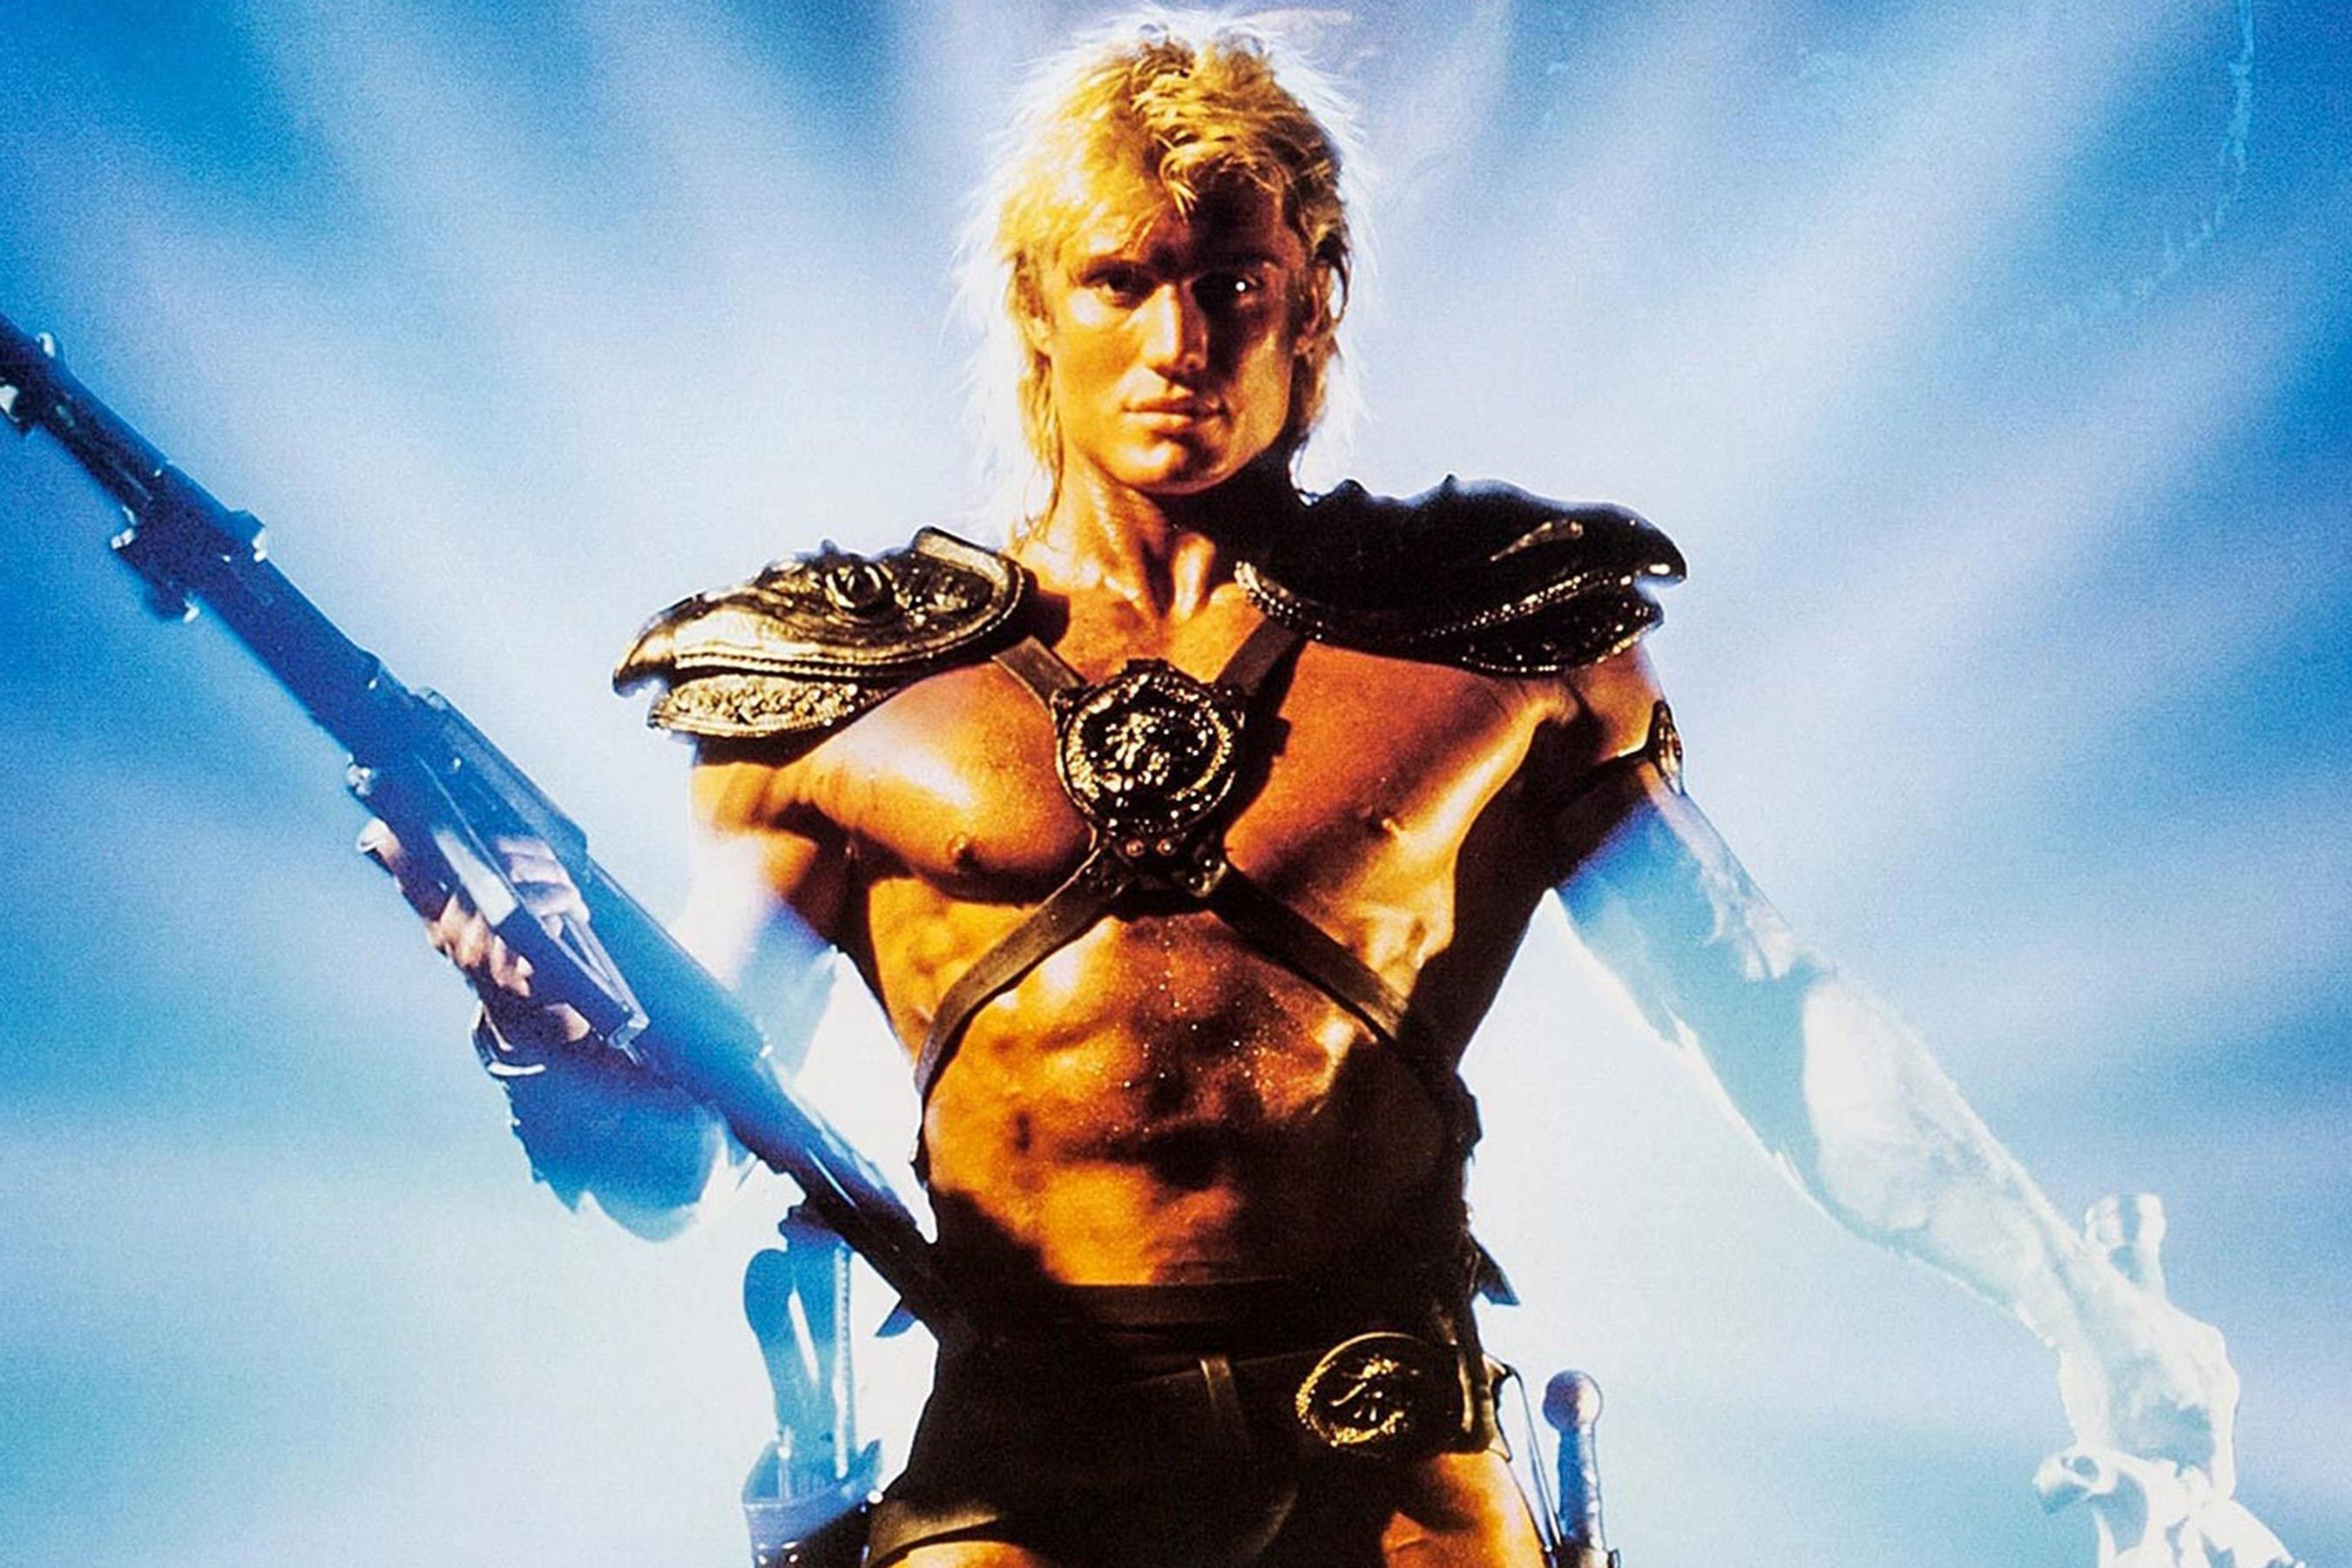 Original Masters of the Universe movie poster with Dolph Lundgren